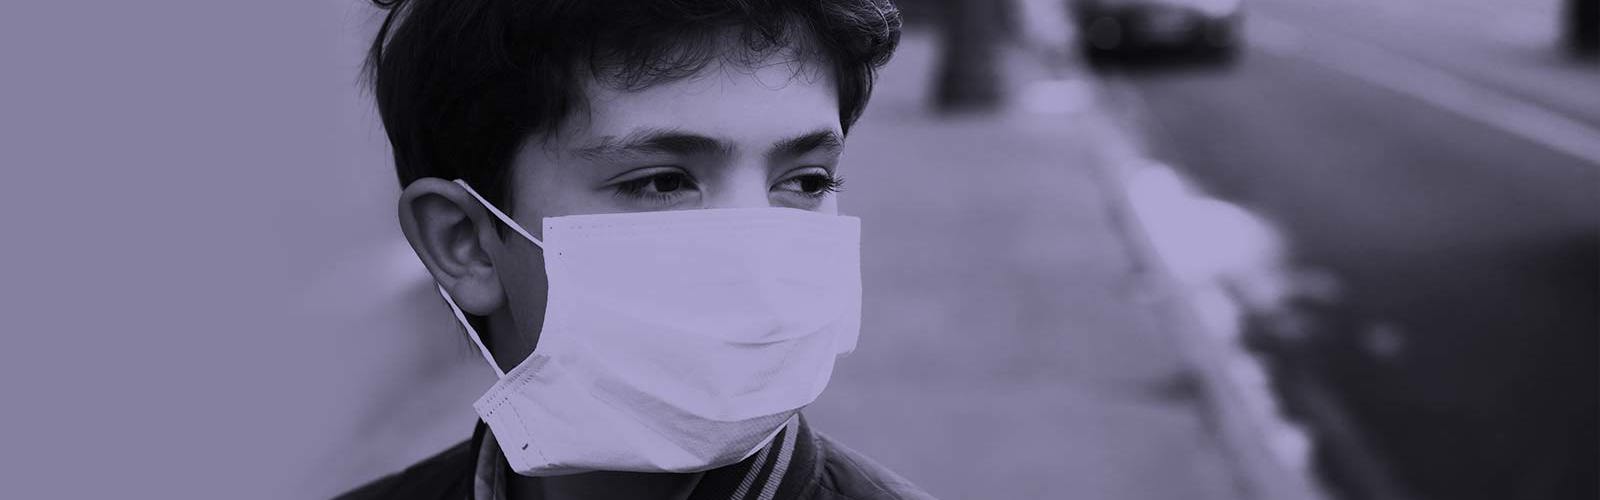 Boy wearing a surgical mask